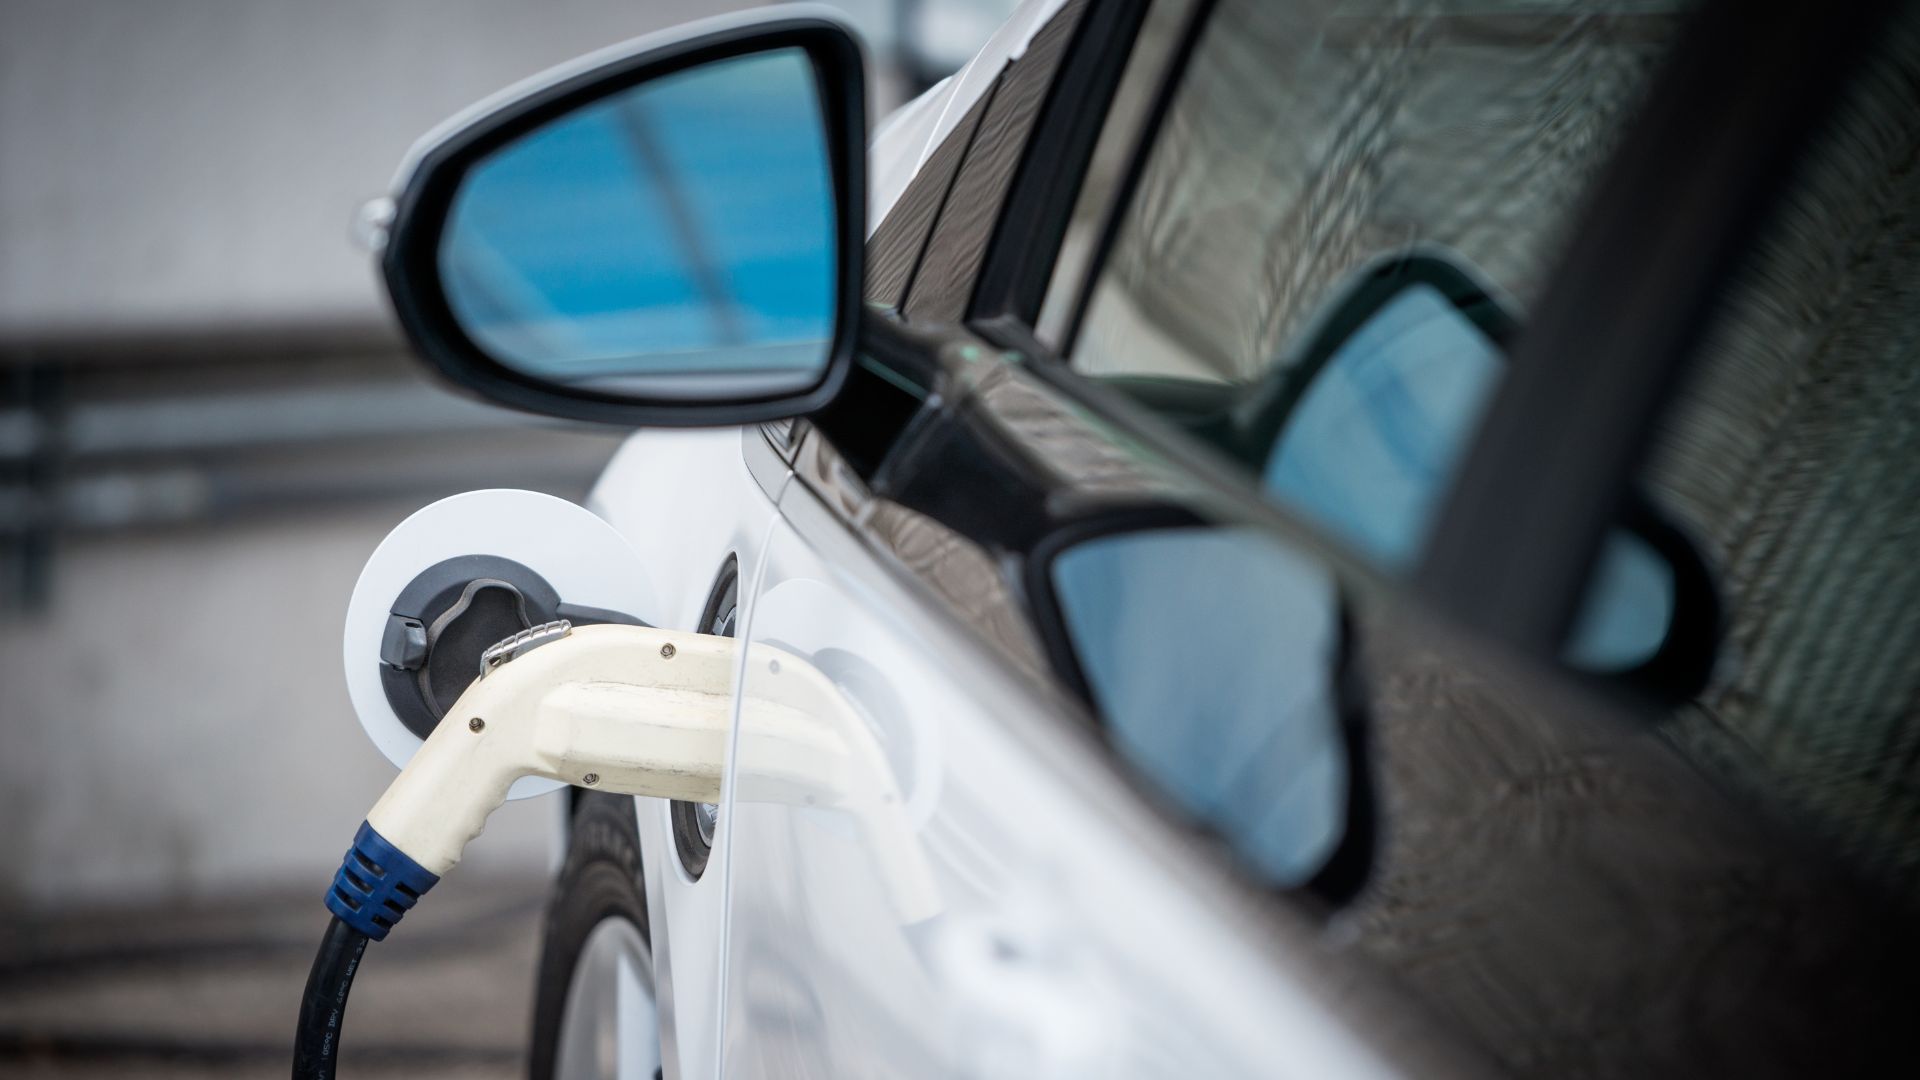 Connected EVs save fleet businesses an average of 15 tonnes of CO2 per vehicle, per year Webfleet research finds